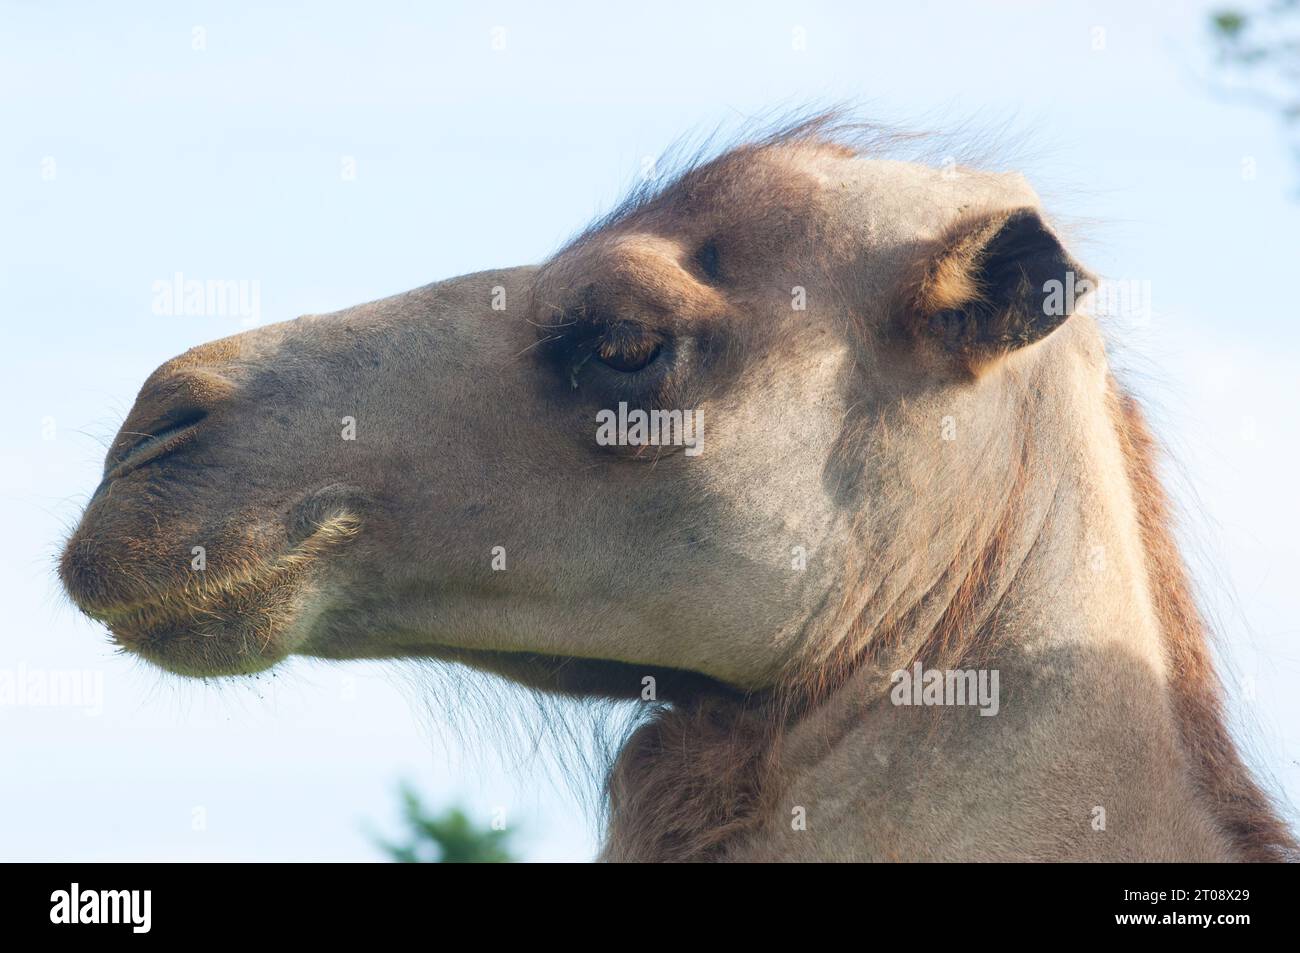 Close-up of a camel's face shot on a farm in the UK - John Gollop Stock Photo